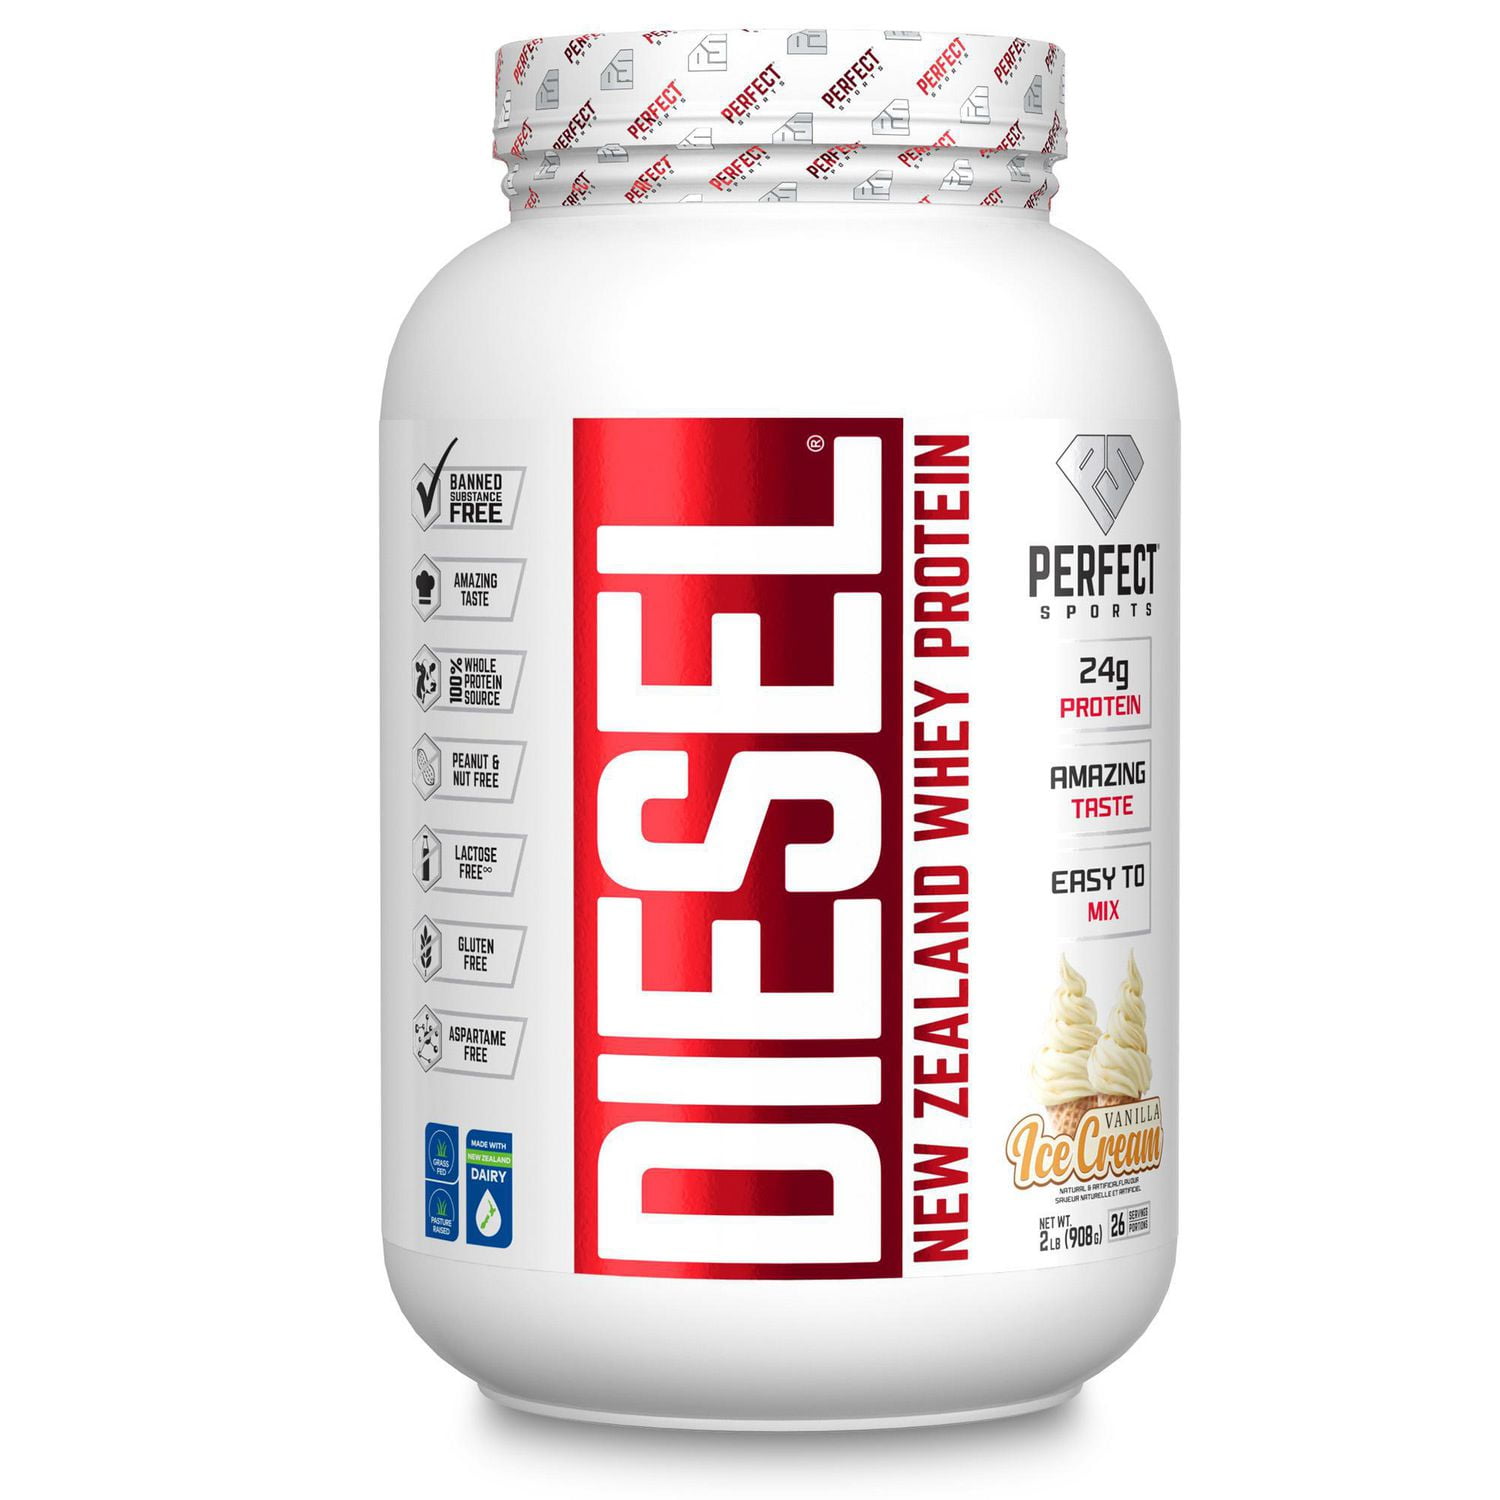 PERFECT Sports - DIESEL New Zealand Whey Protein, Grass-Fed +